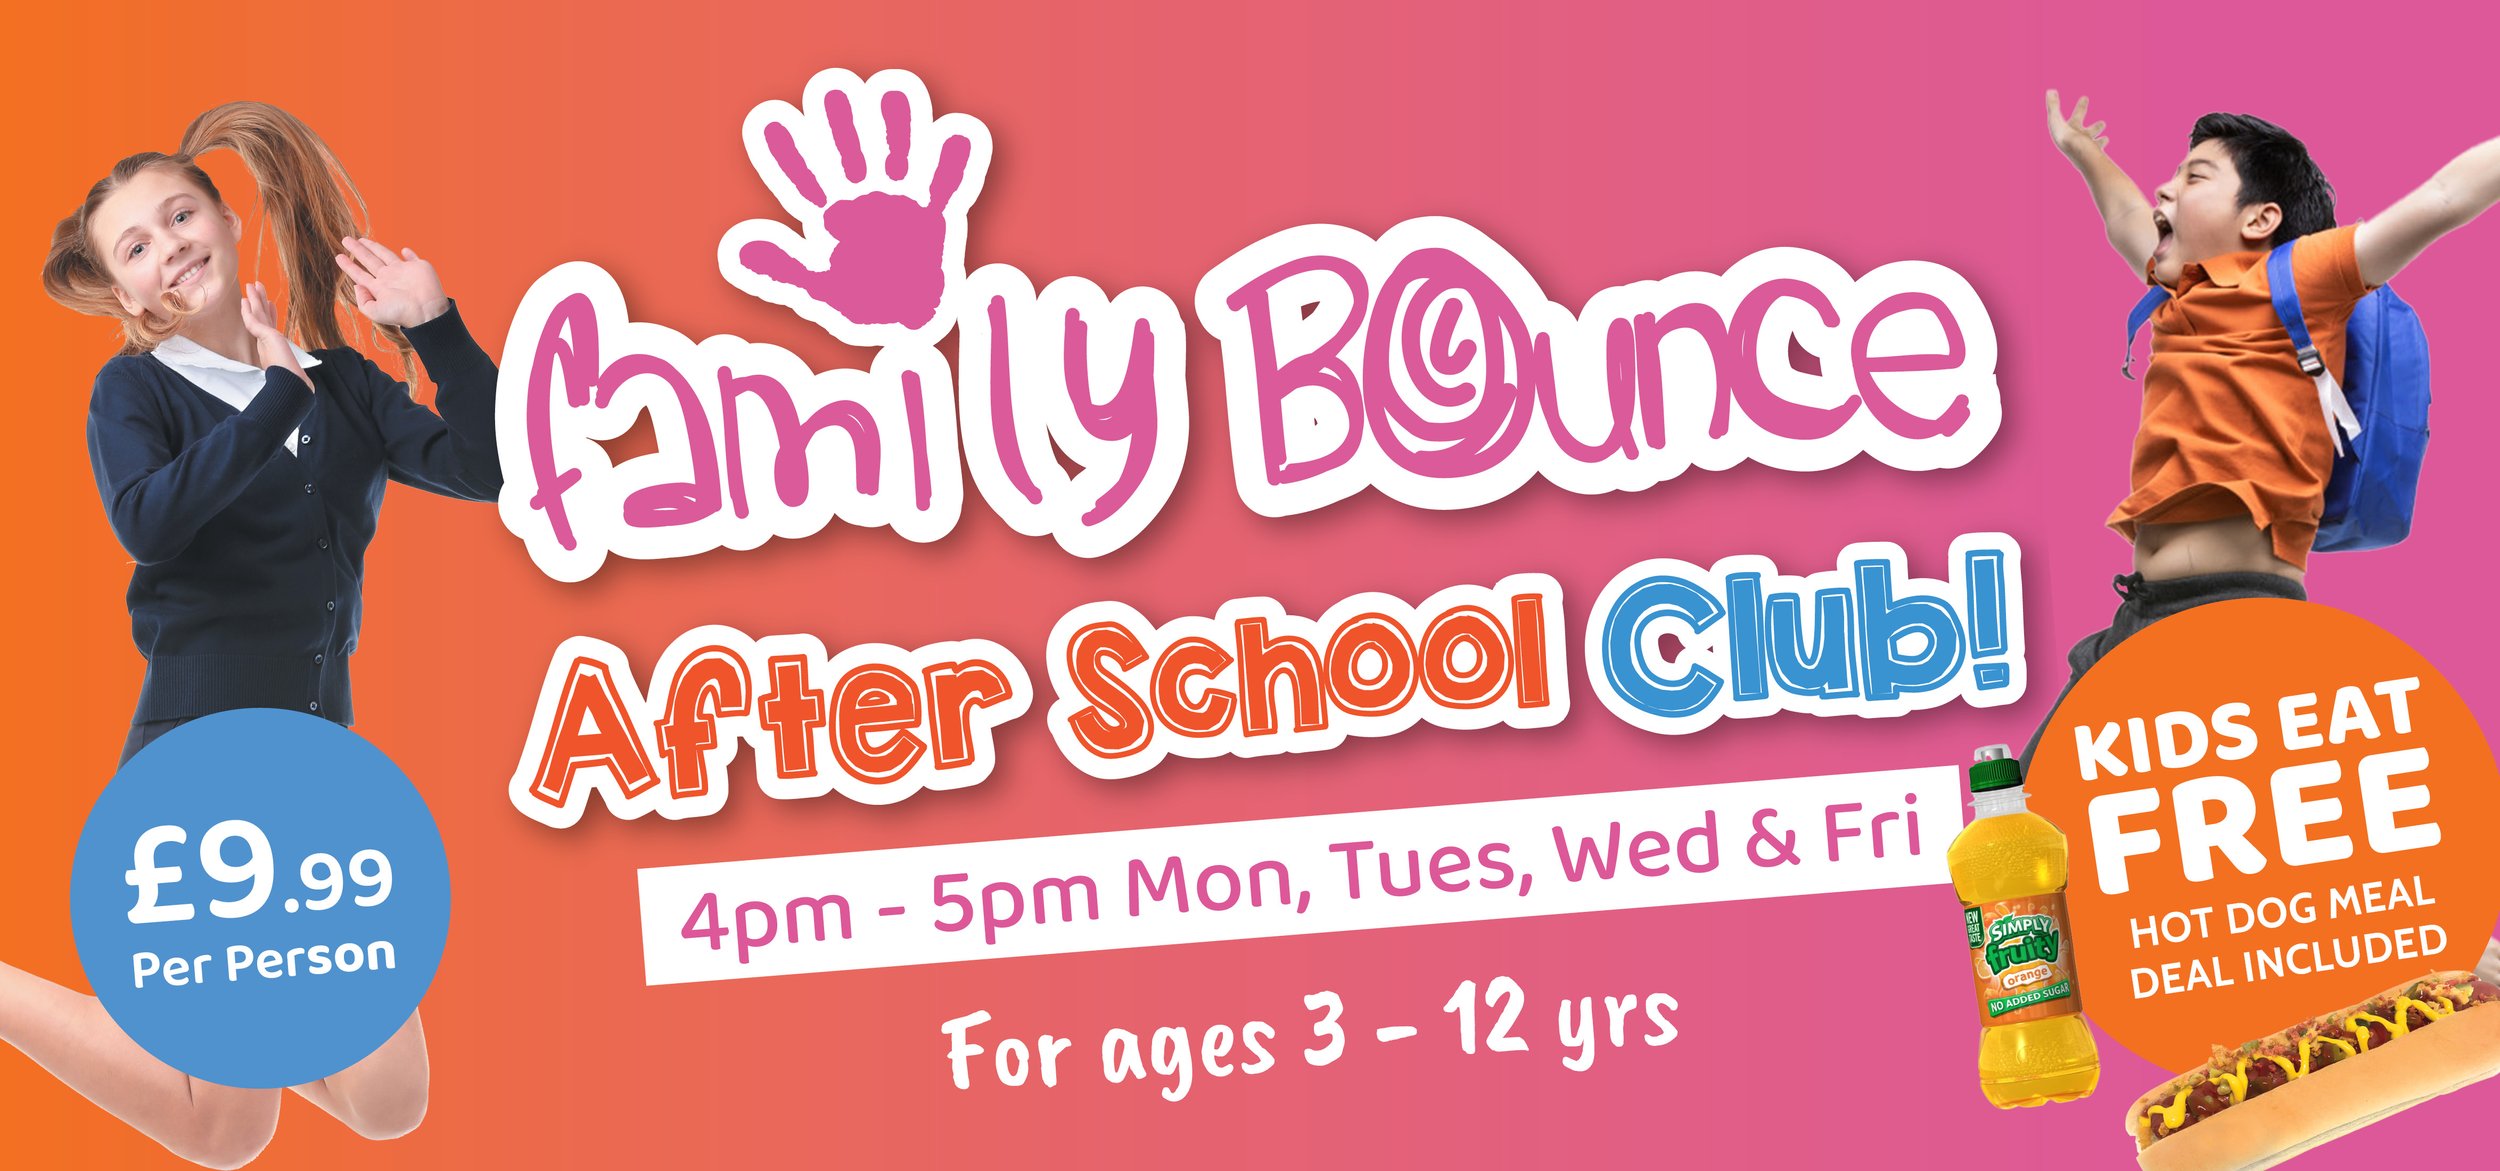 Family Bounce - After School Club - Website Banners.jpg